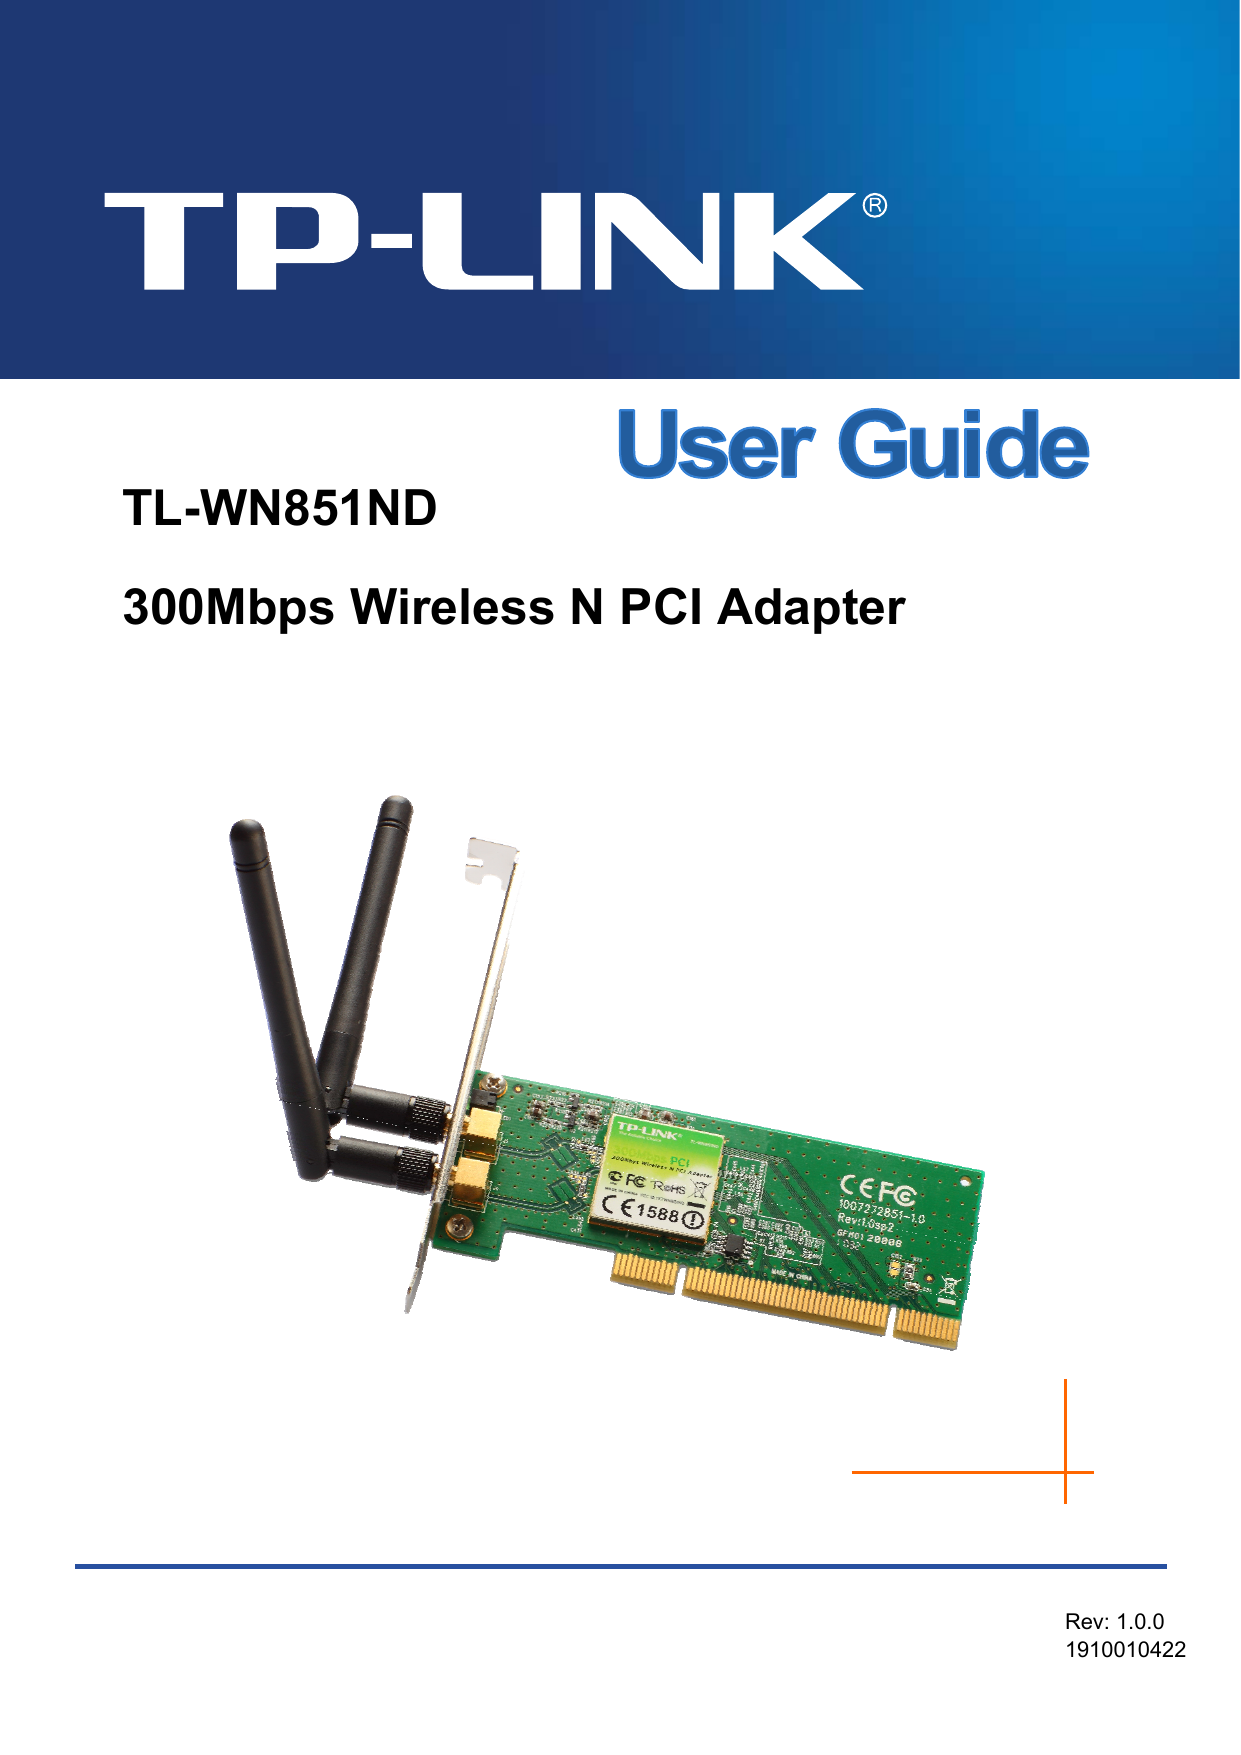   TL-WN851ND 300Mbps Wireless N PCI Adapter                     Rev: 1.0.0 1910010422 